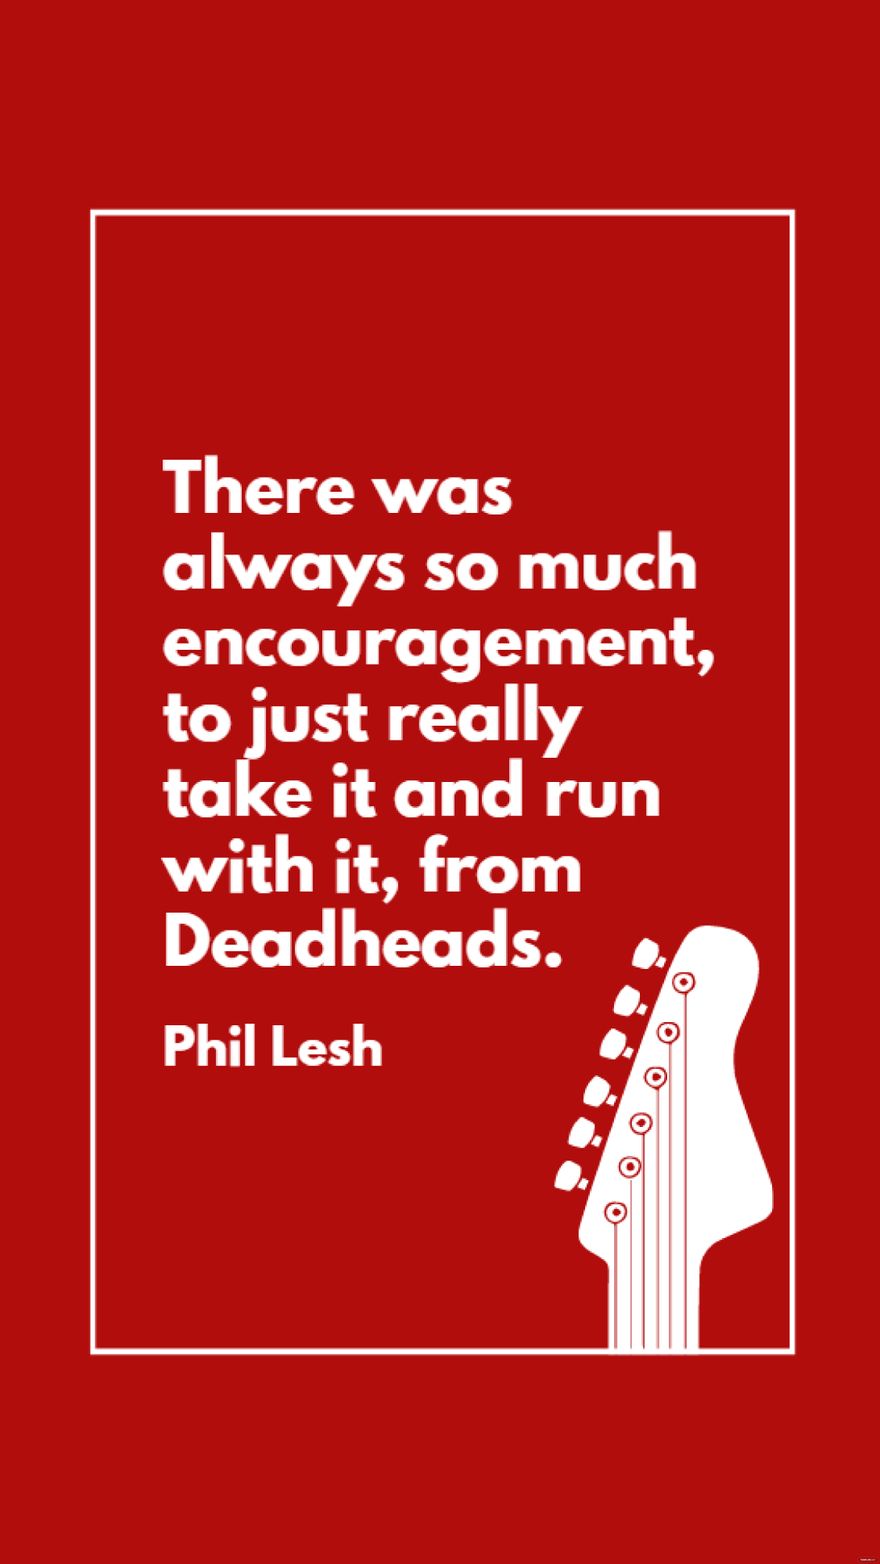 Phil Lesh - There was always so much encouragement, to just really take it and run with it, from Deadheads. in JPG